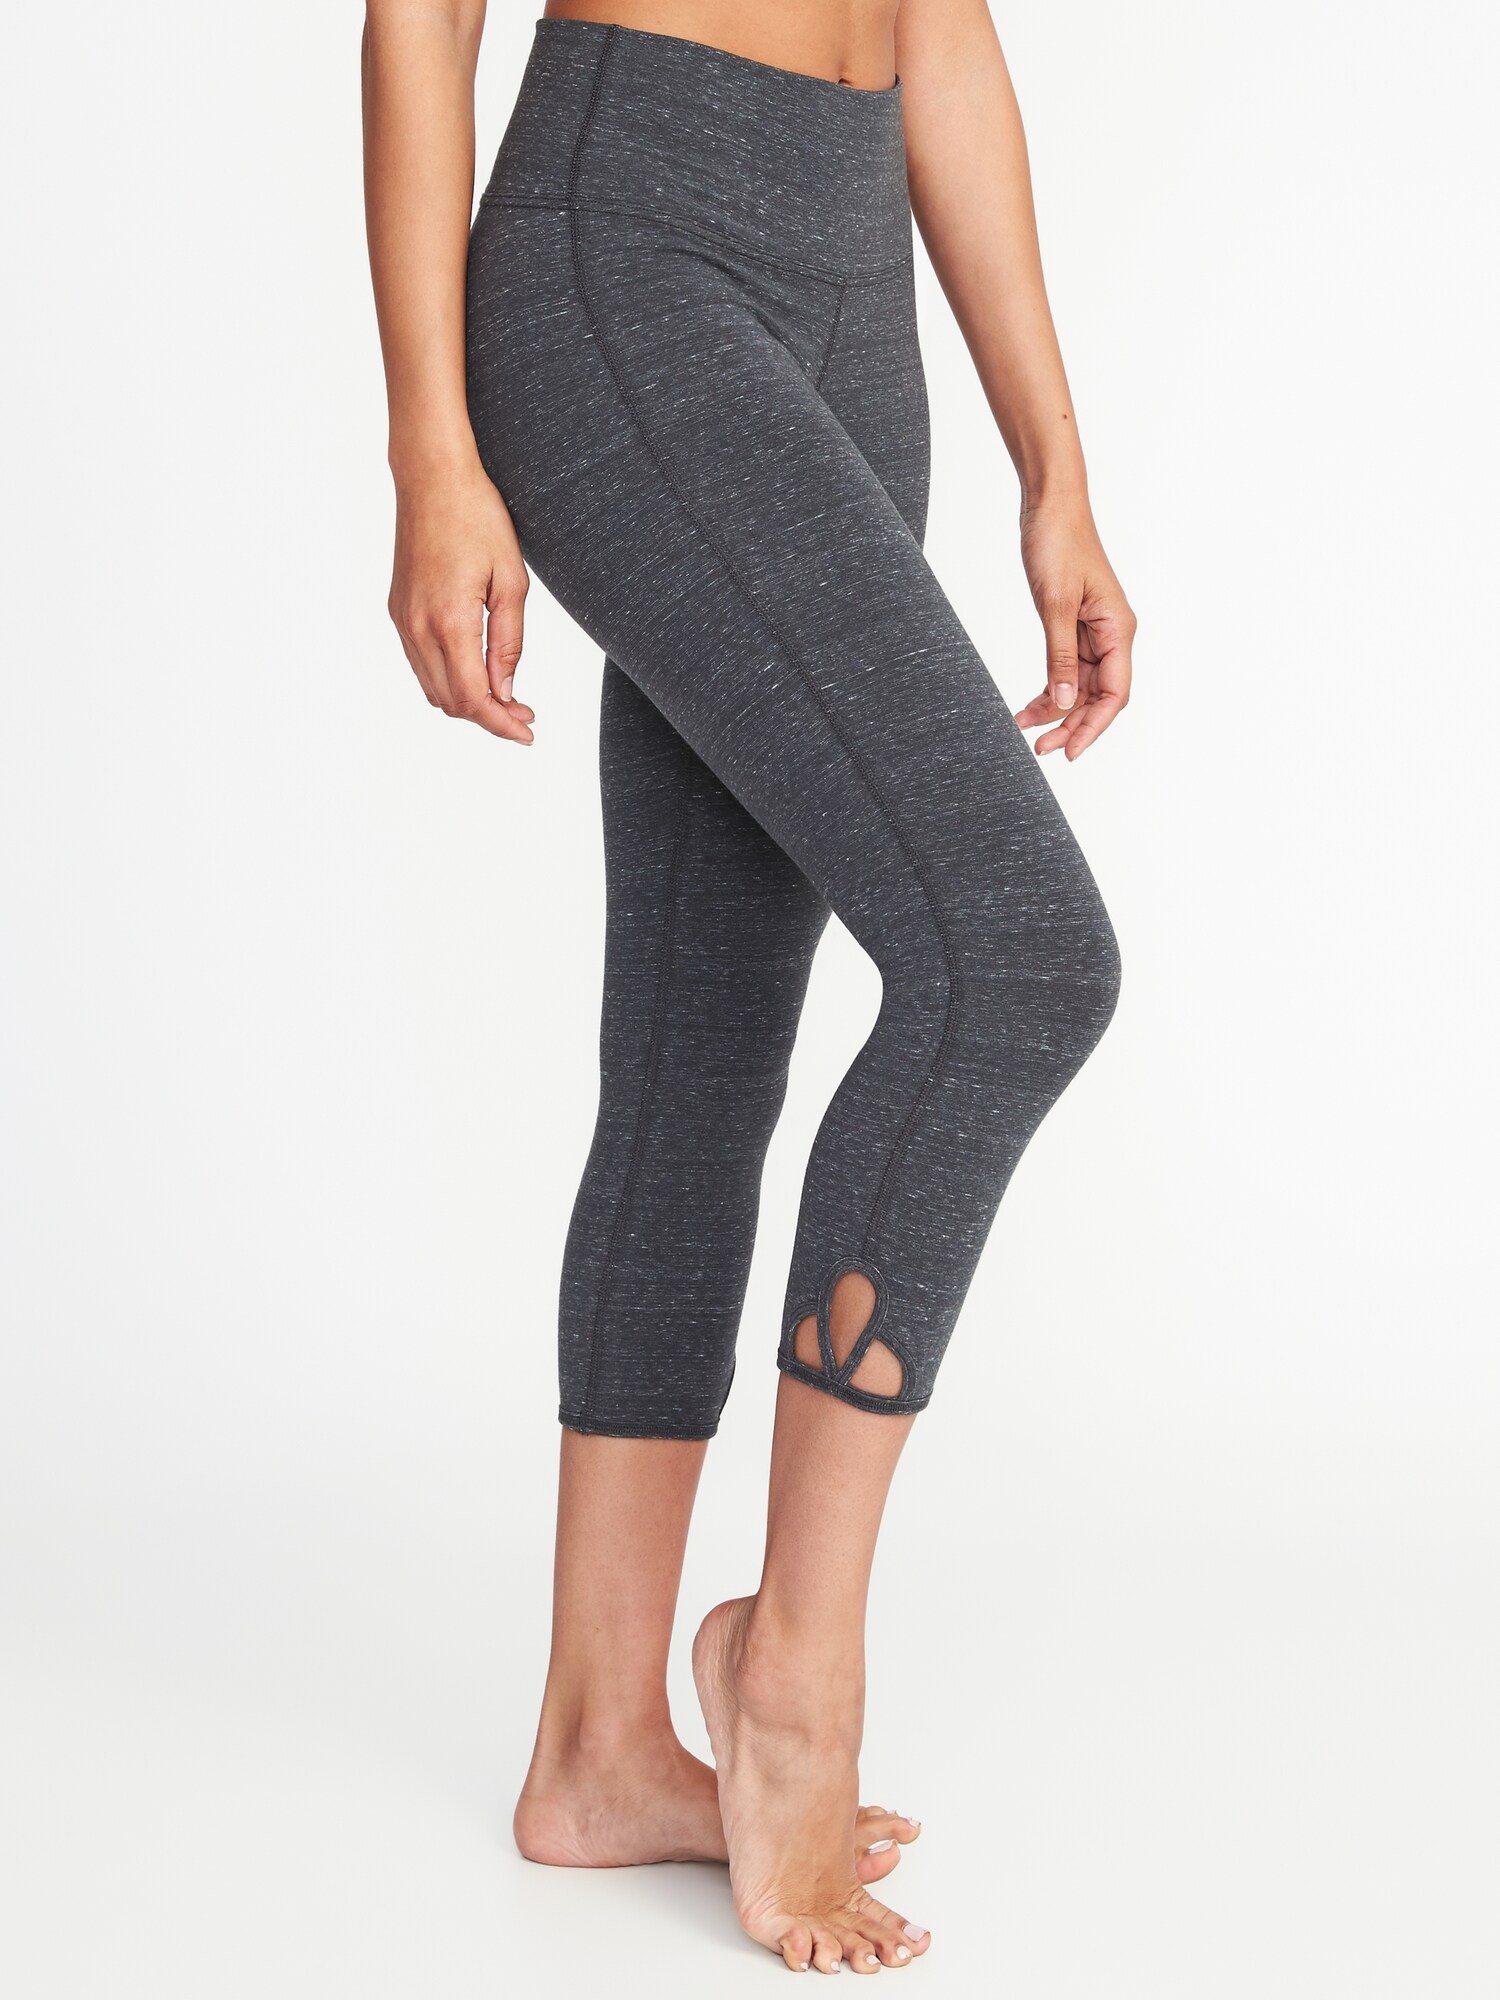 Go-Dry High-Rise Yoga Crops for Women